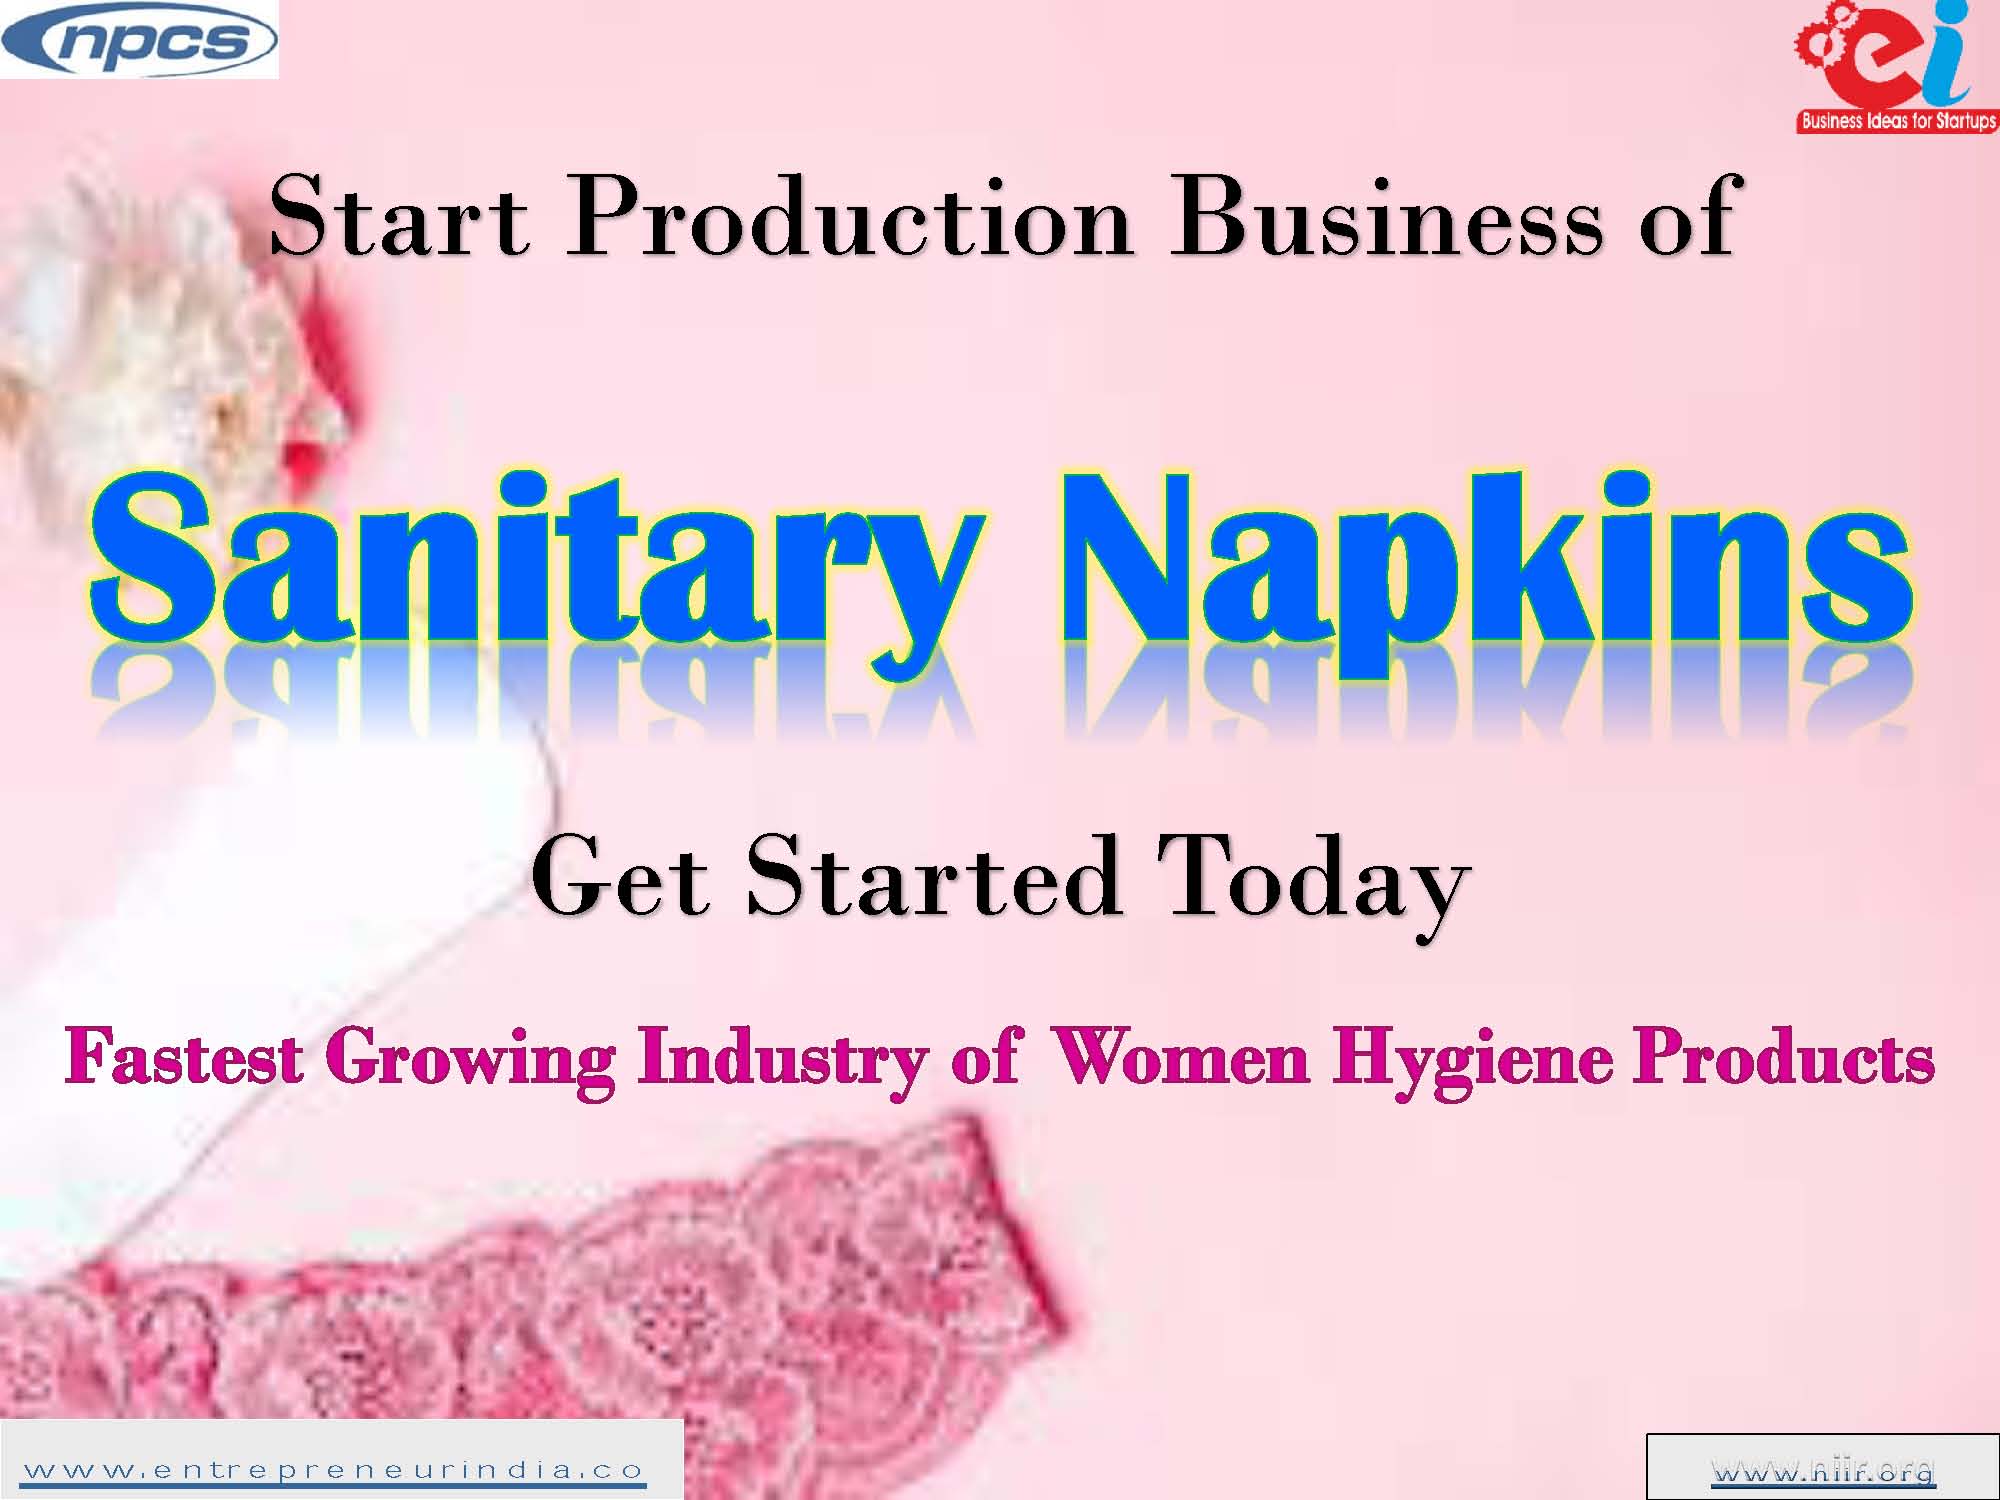 Start Production Business of Sanitary Napkins Get Started Today Fastest Growing Industry of Women Hygiene Products